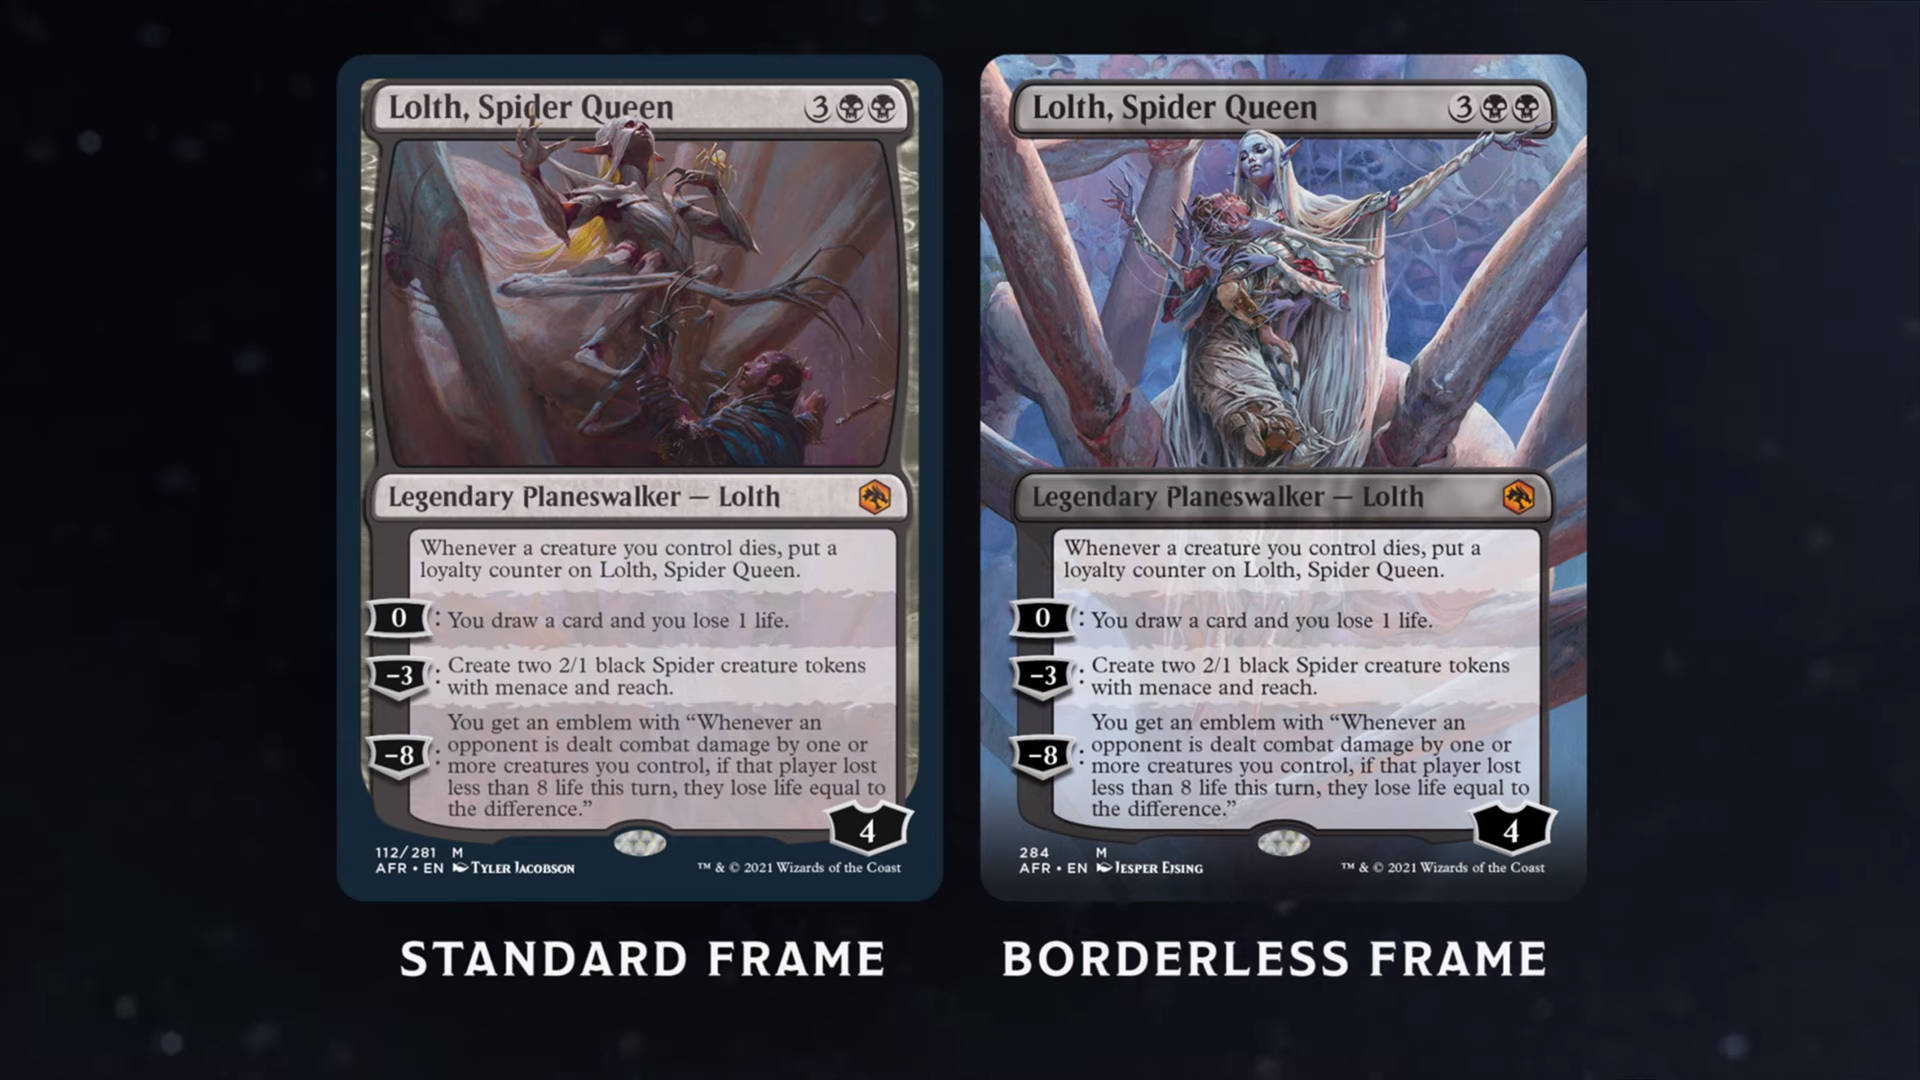 Magic: The Gathering Drizzt Do'Urden Forgotten Realms Lolth, Spider Queen card